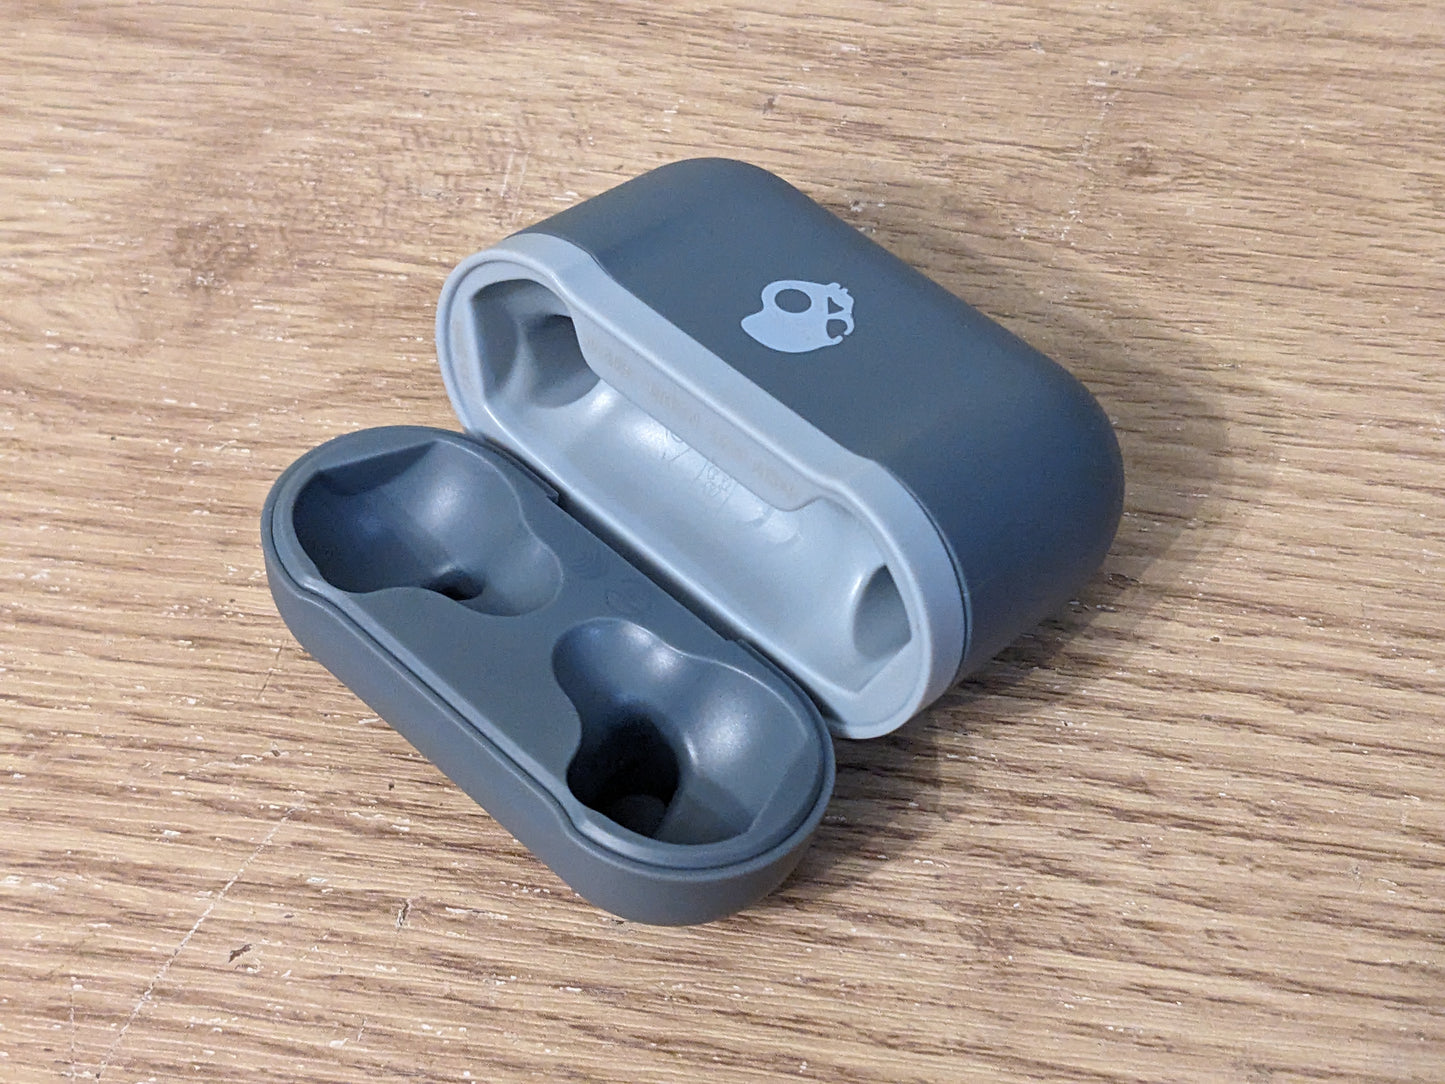 Skullcandy Indy Evo replacement parts: charging case, left/right earbuds